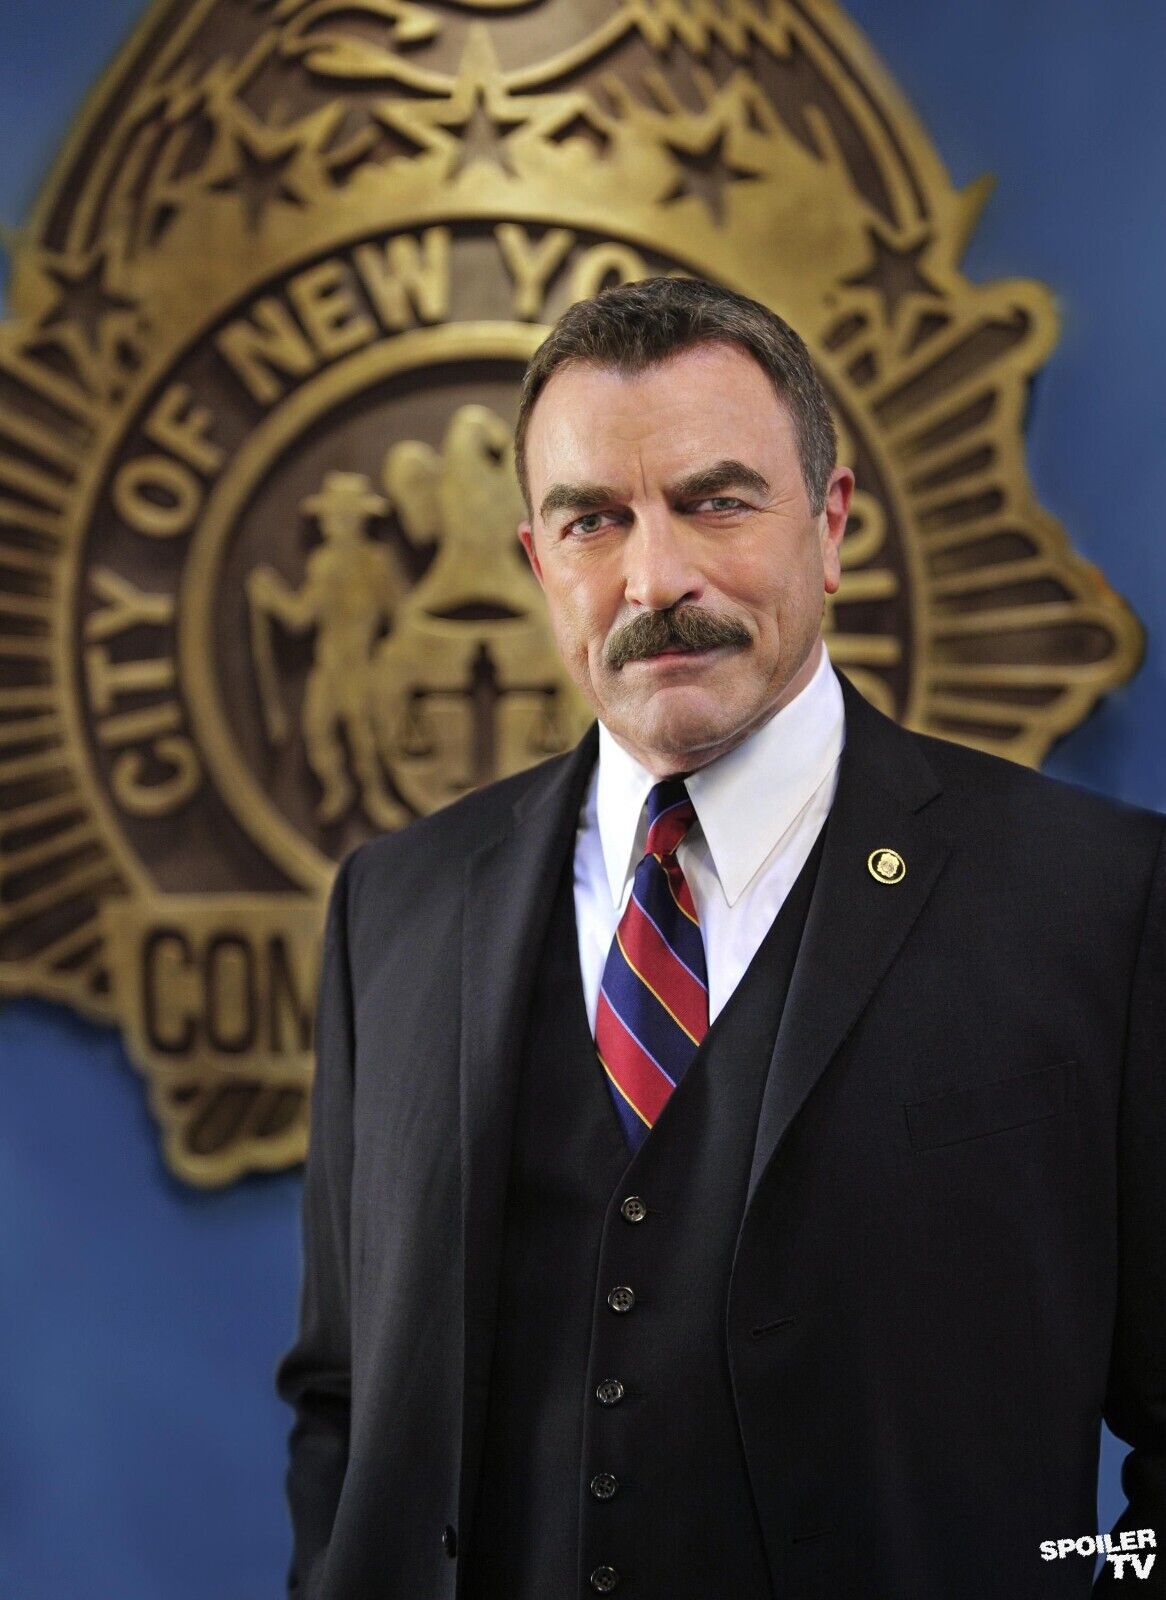 Actor Tom Selleck Blue Bloods TV Series Publicity Picture Poster Photo 4x6